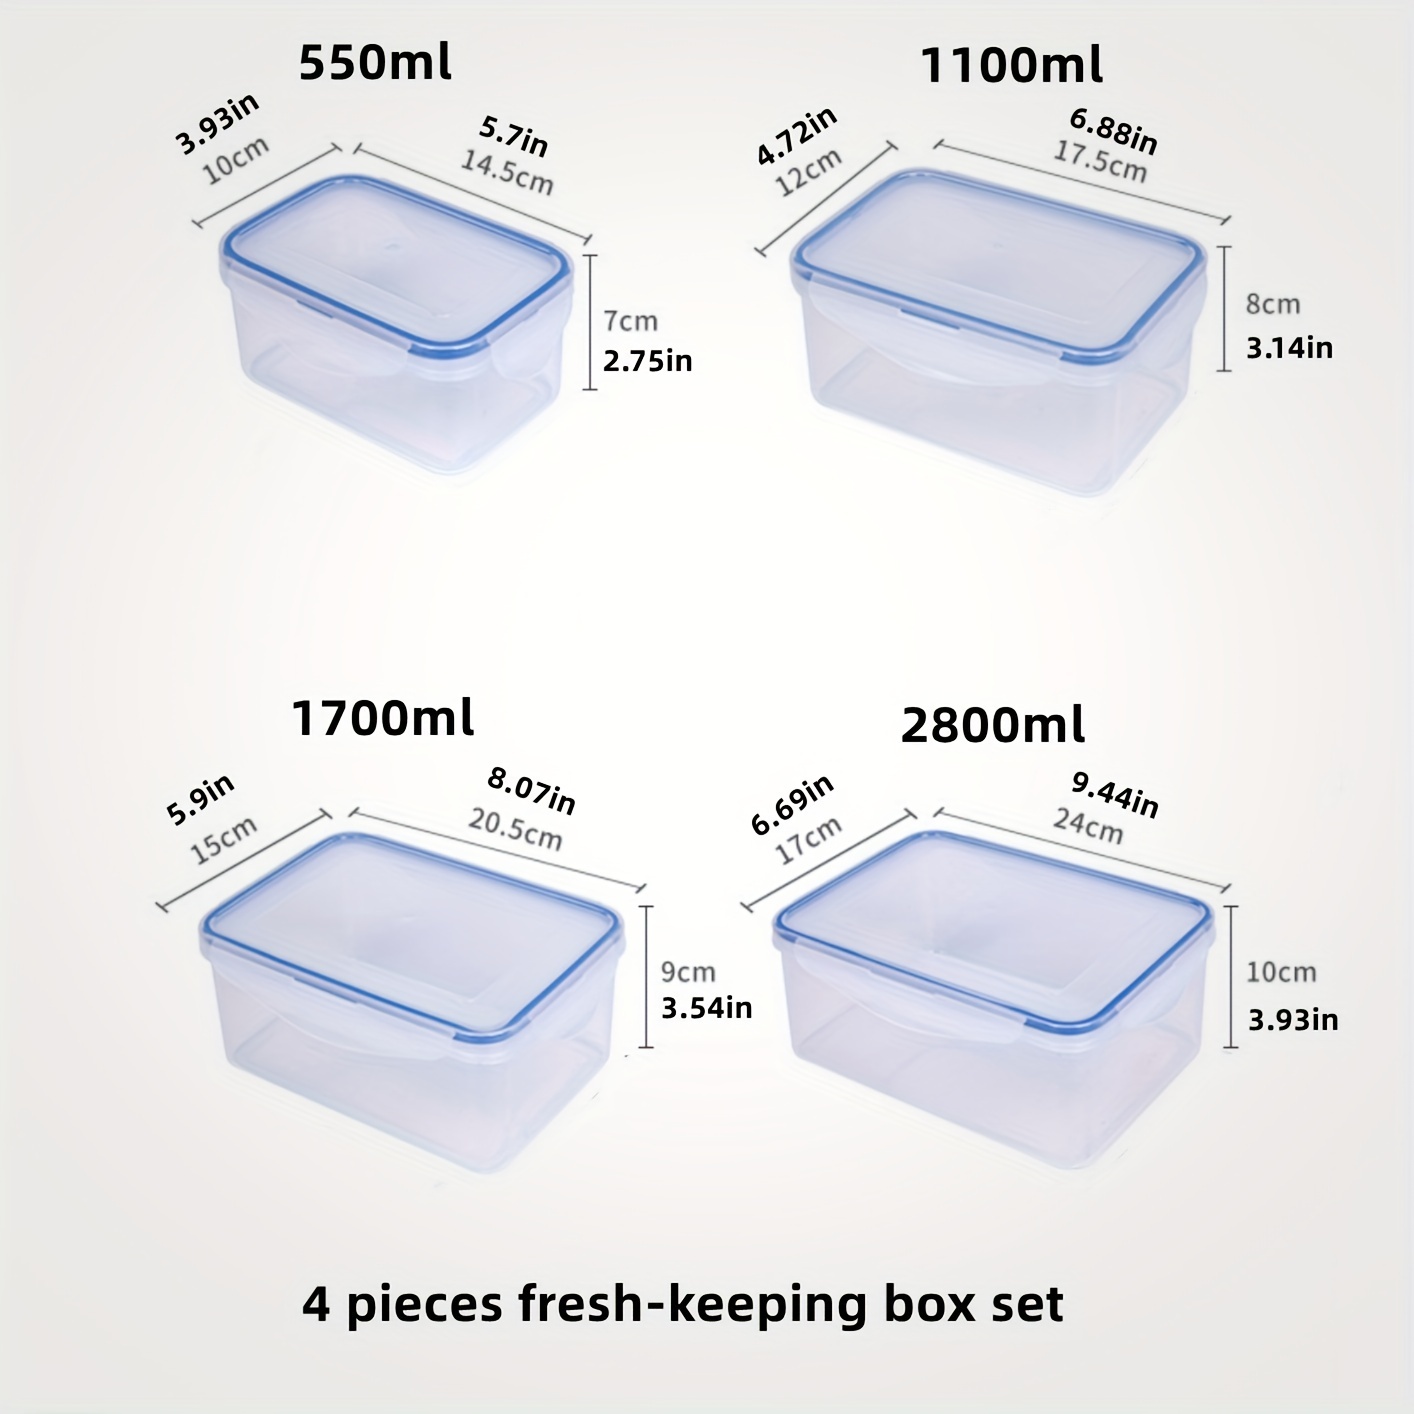 1700ml Bento Lunch Box Heat-resistance Food Box Microwave Oven